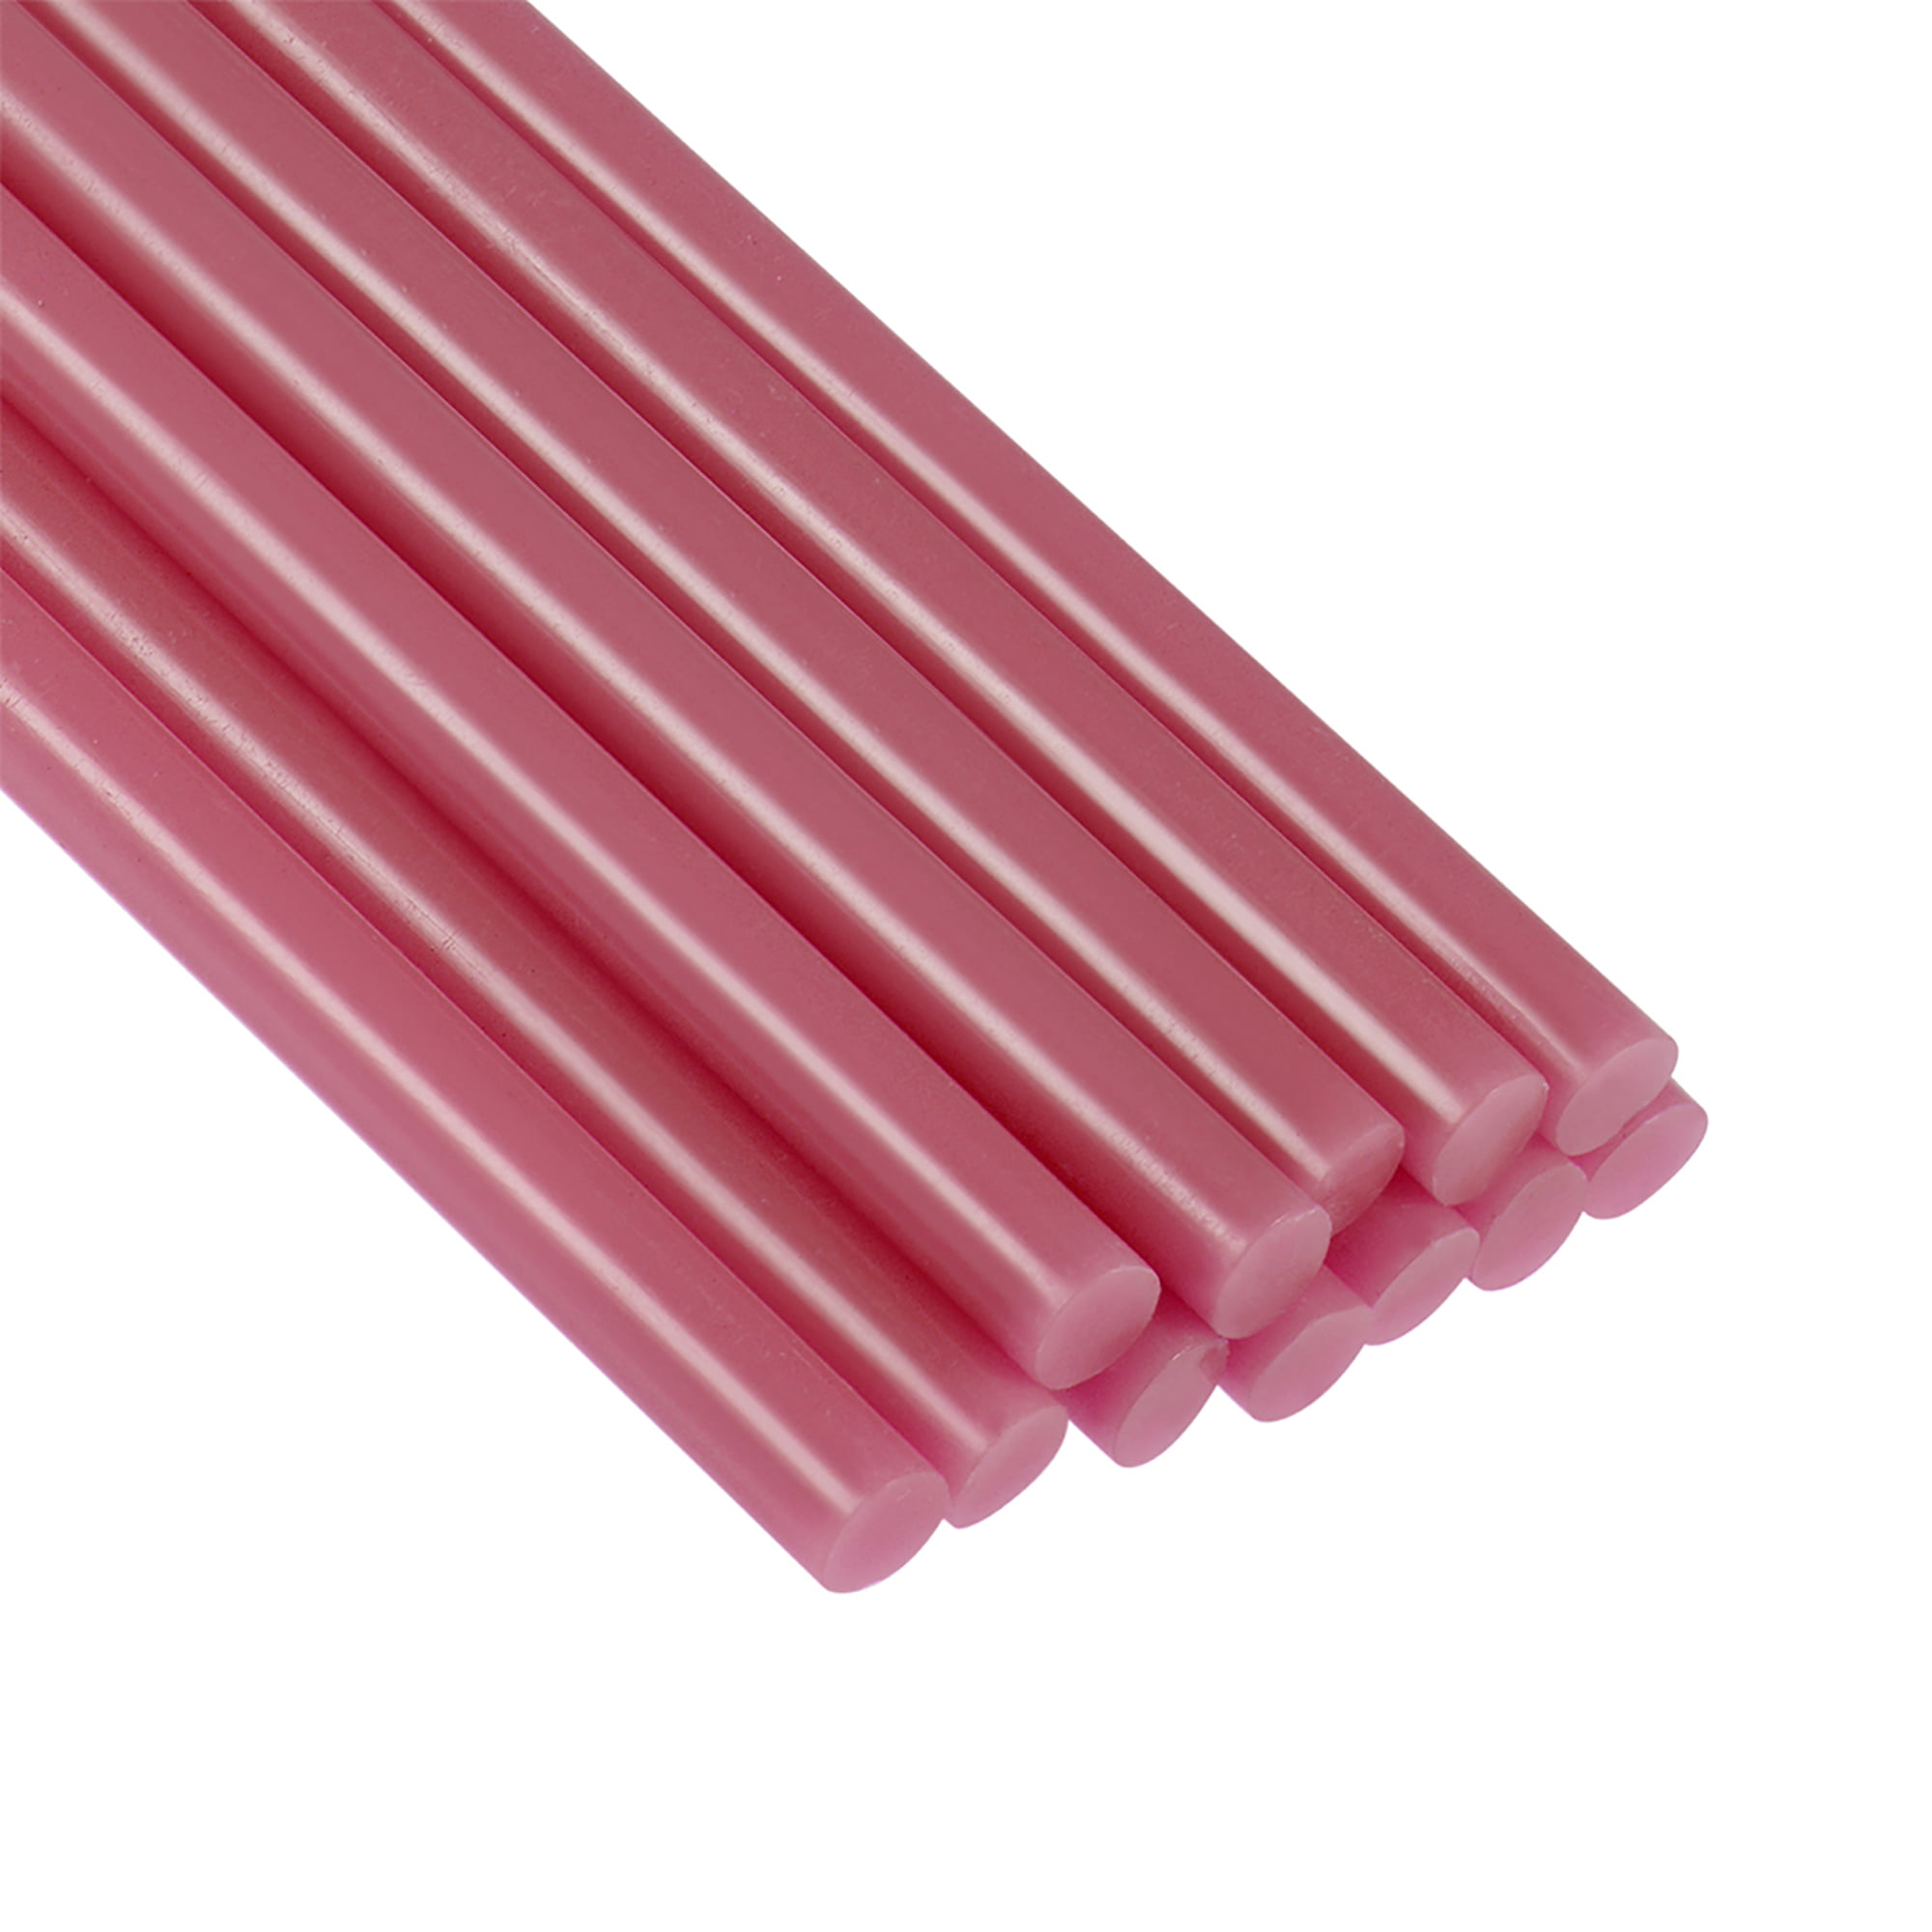 Hot Melt Glue Gun Sticks, 250mm Long x 11mm Diameter,Compatible with Most Glue Guns, Perfect for DIY Craft Projects and Sealing,Pink,20pcs